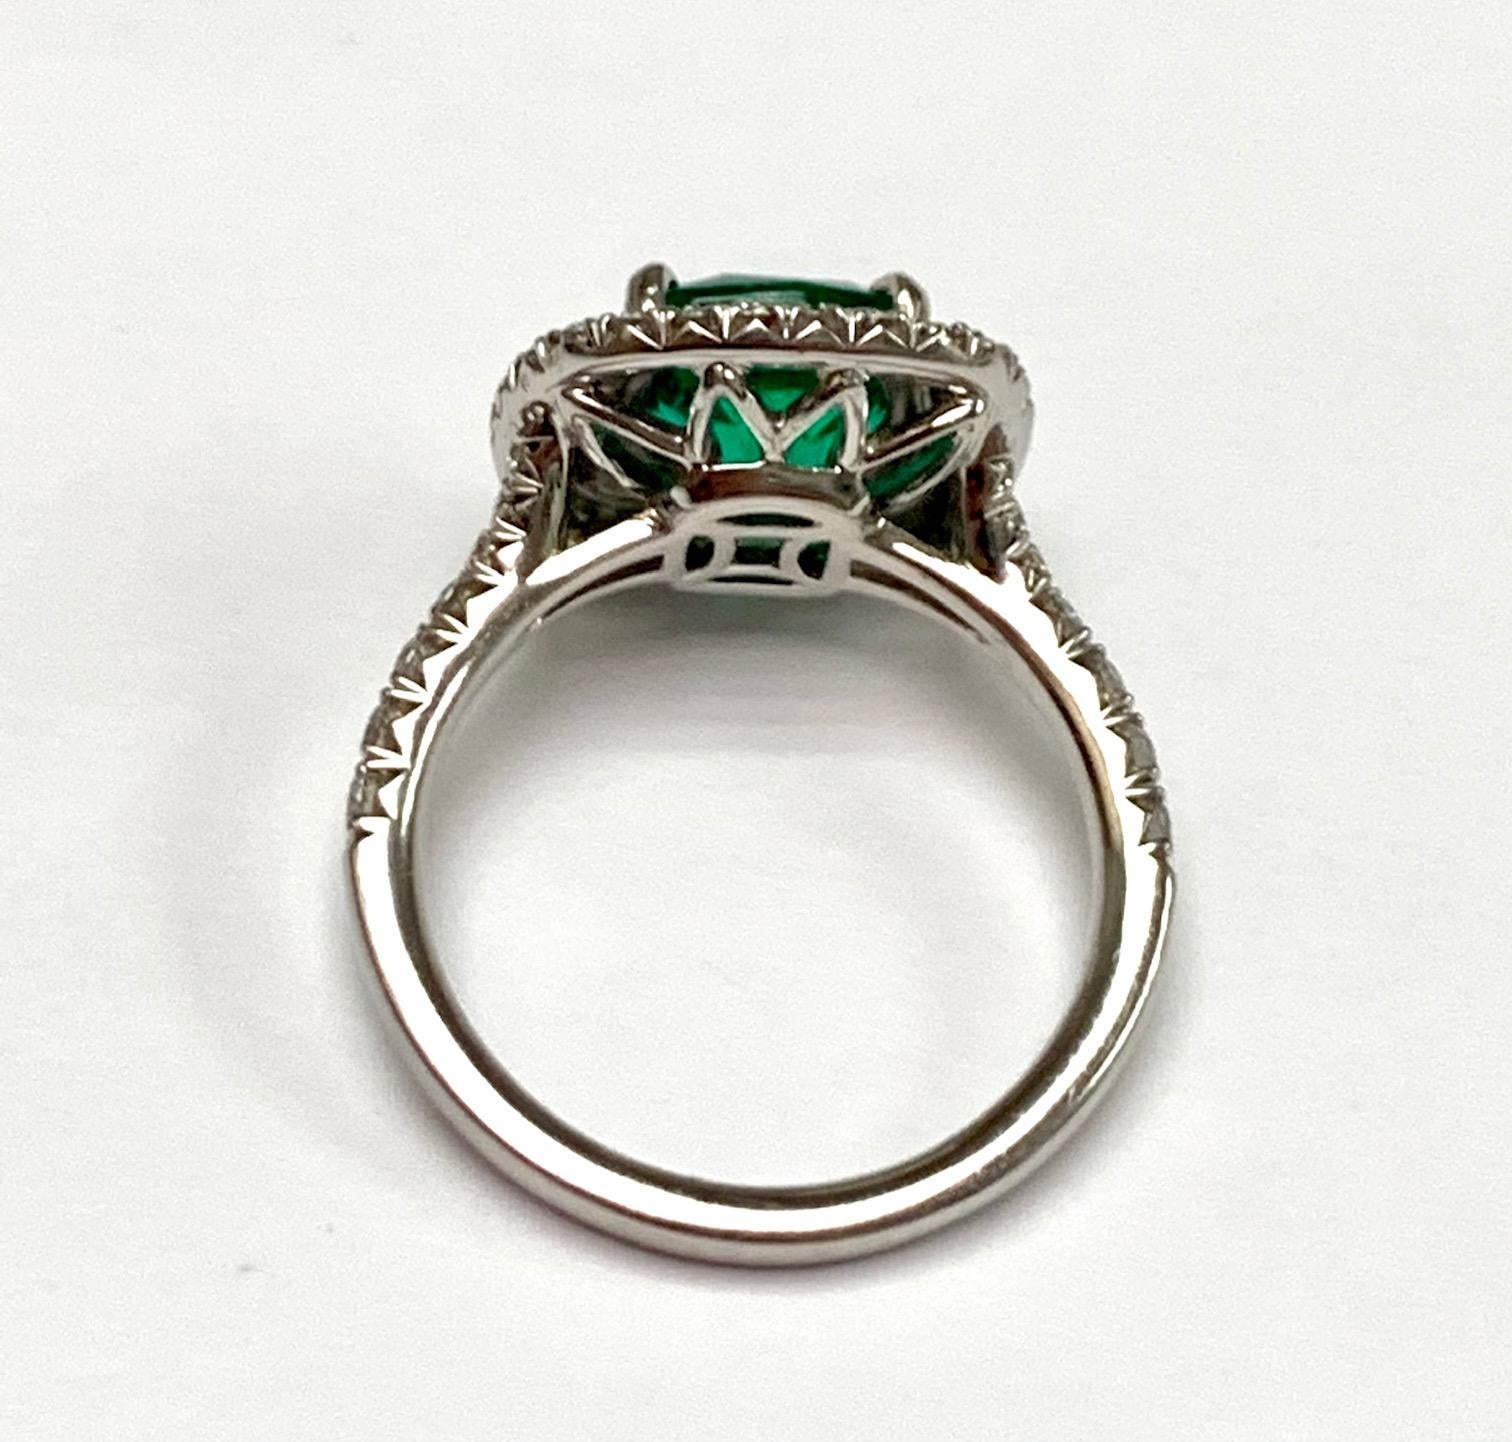 1.92 Carat Cushion Cut Zambian Emerald Diamond Cocktail Ring In New Condition For Sale In New York, NY